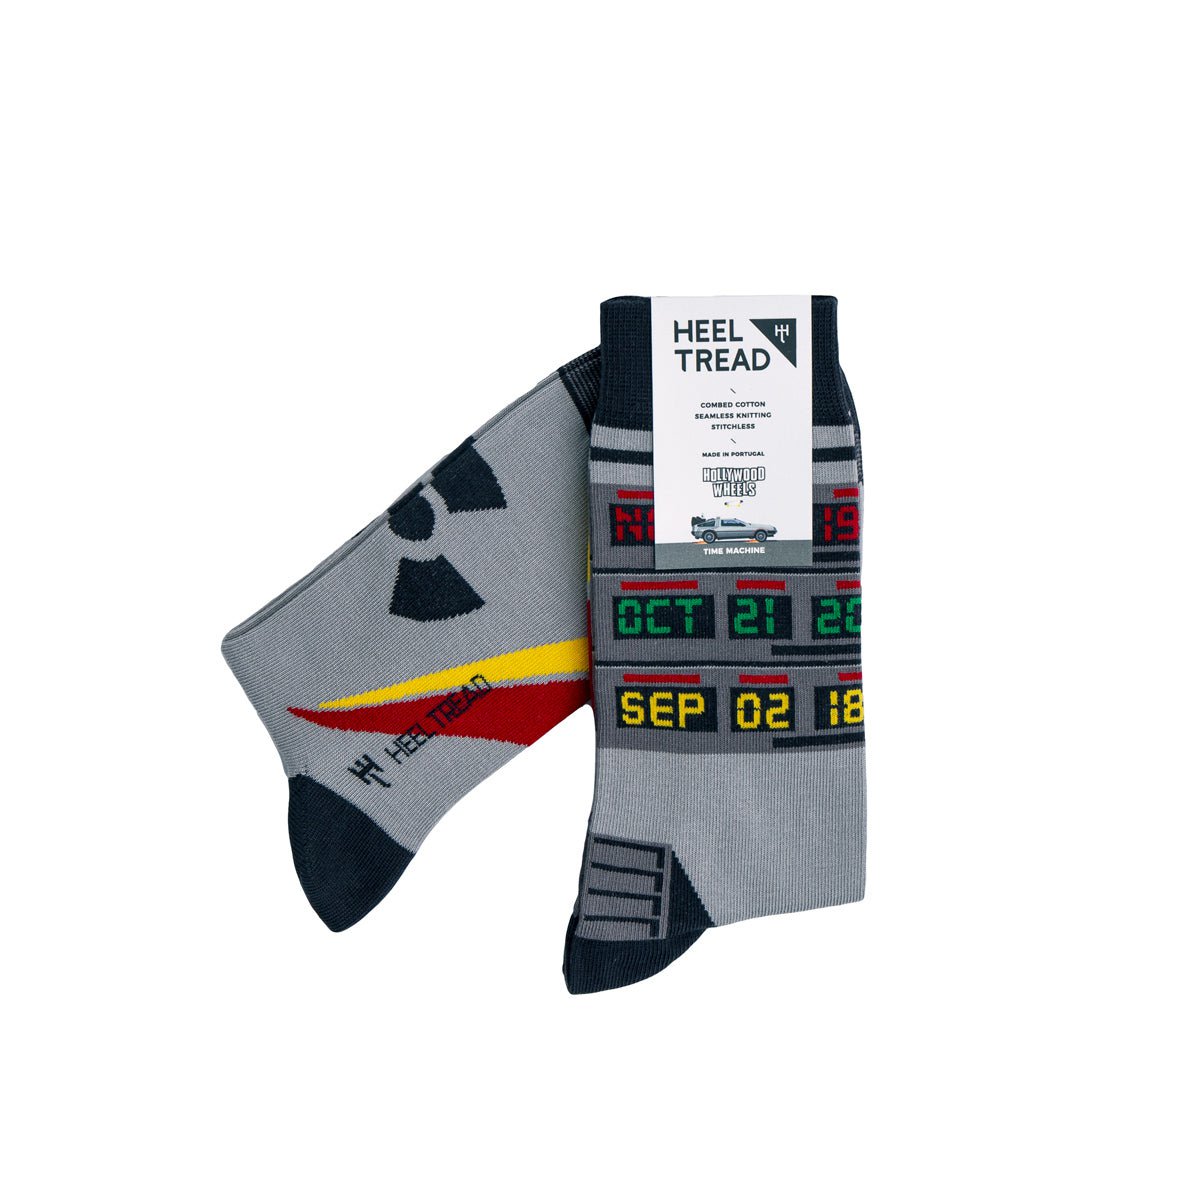 Back to the Future Socks